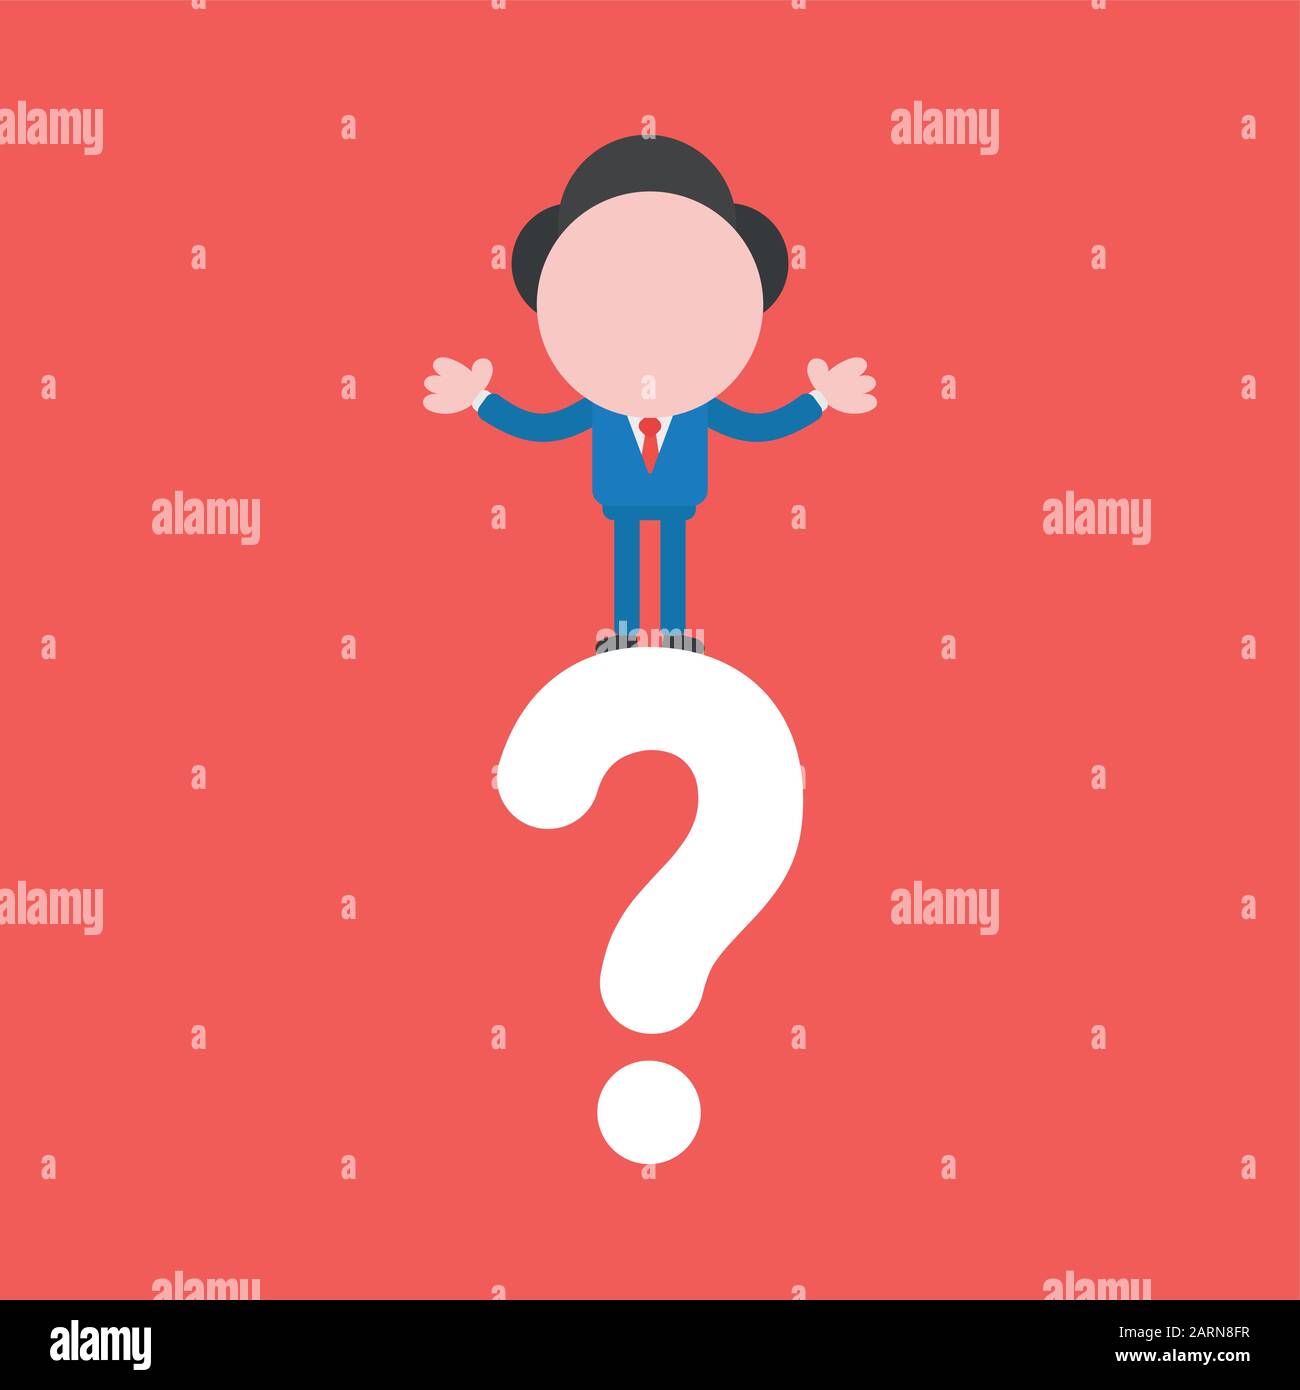 Vector cartoon illustration concept of faceless businessman mascot character on red question mark symbol icon. Stock Vector